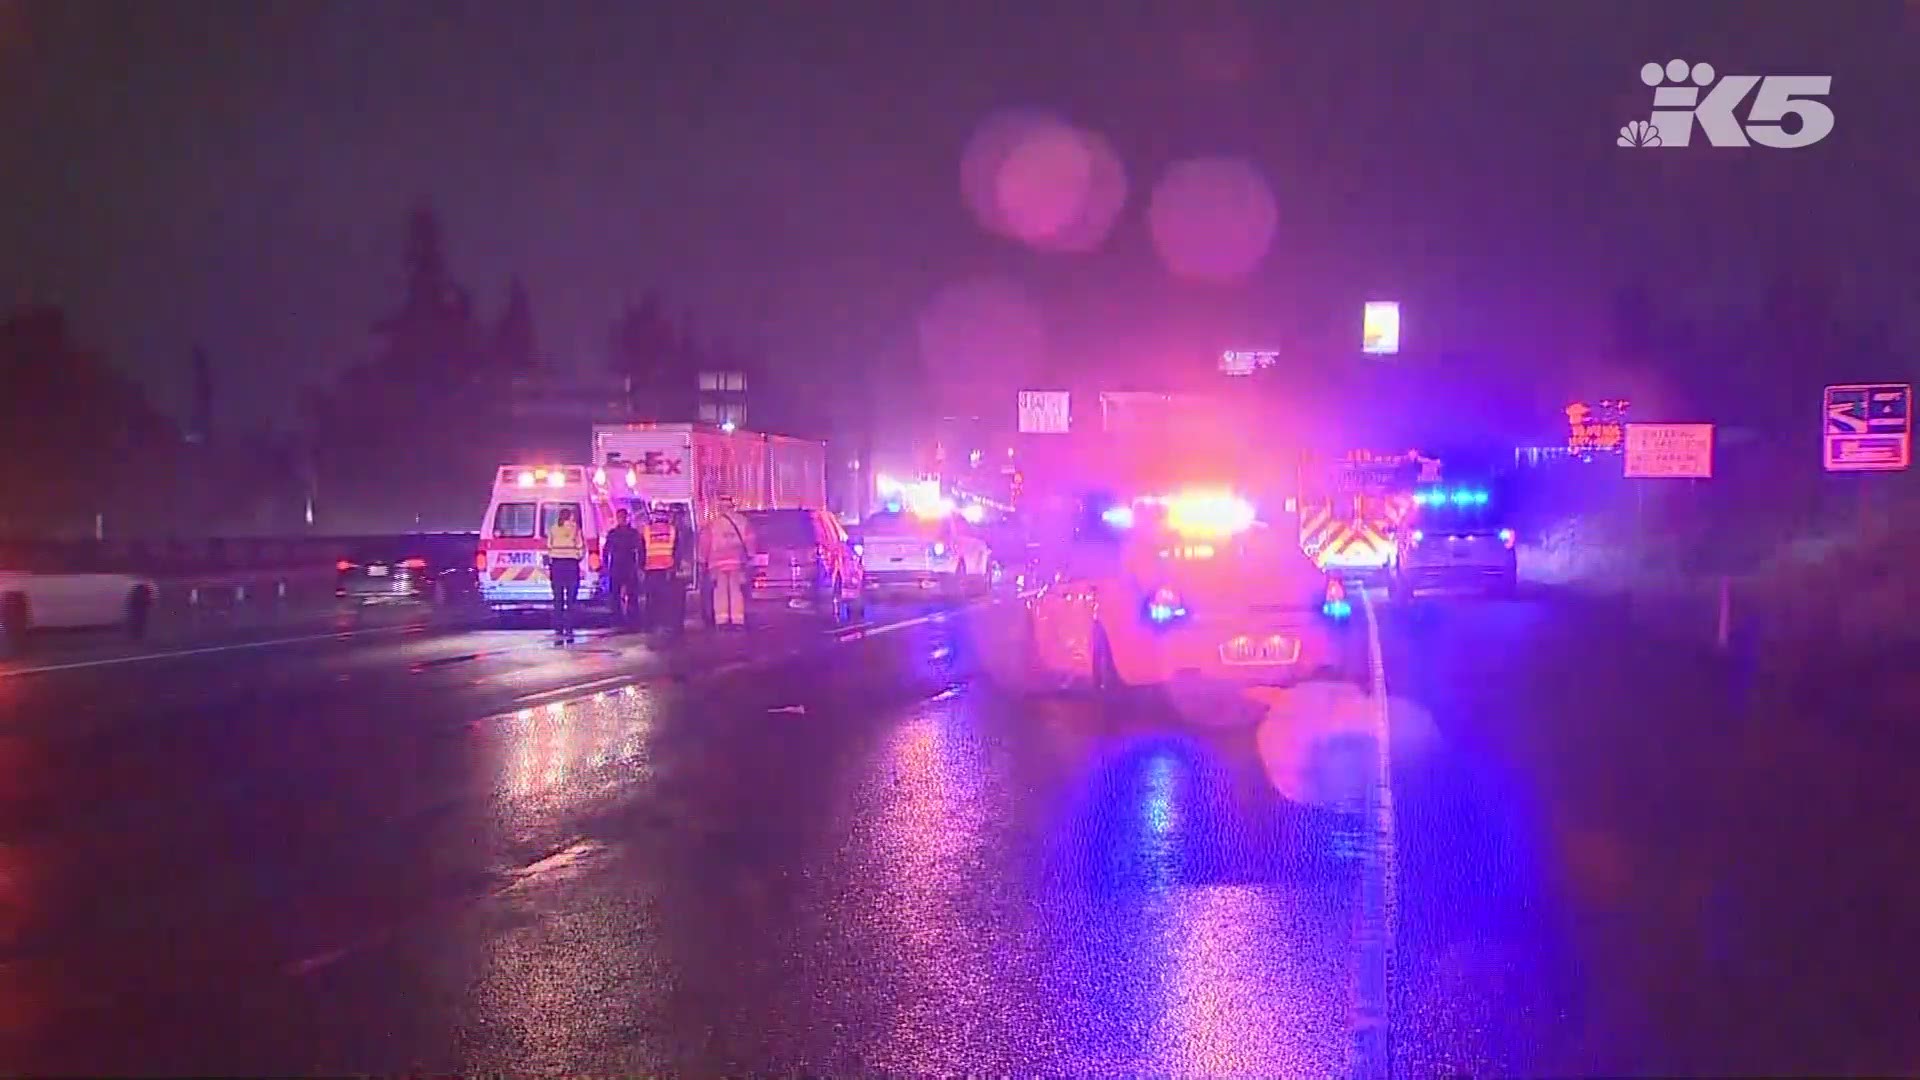 One person died in the overnight crash that happened on southbound I-5 near Federal Way.